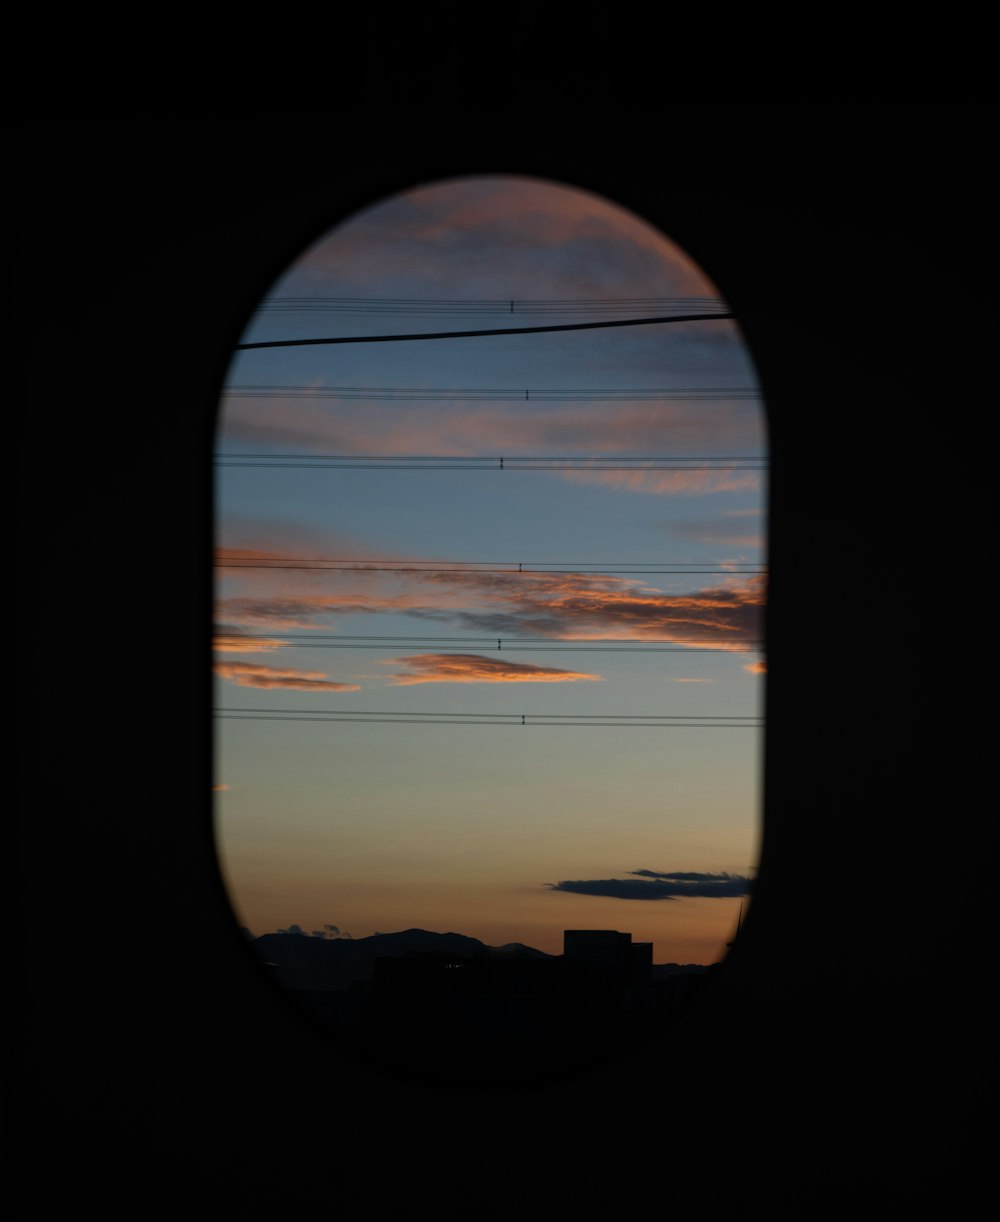 a view of a sunset through an airplane window